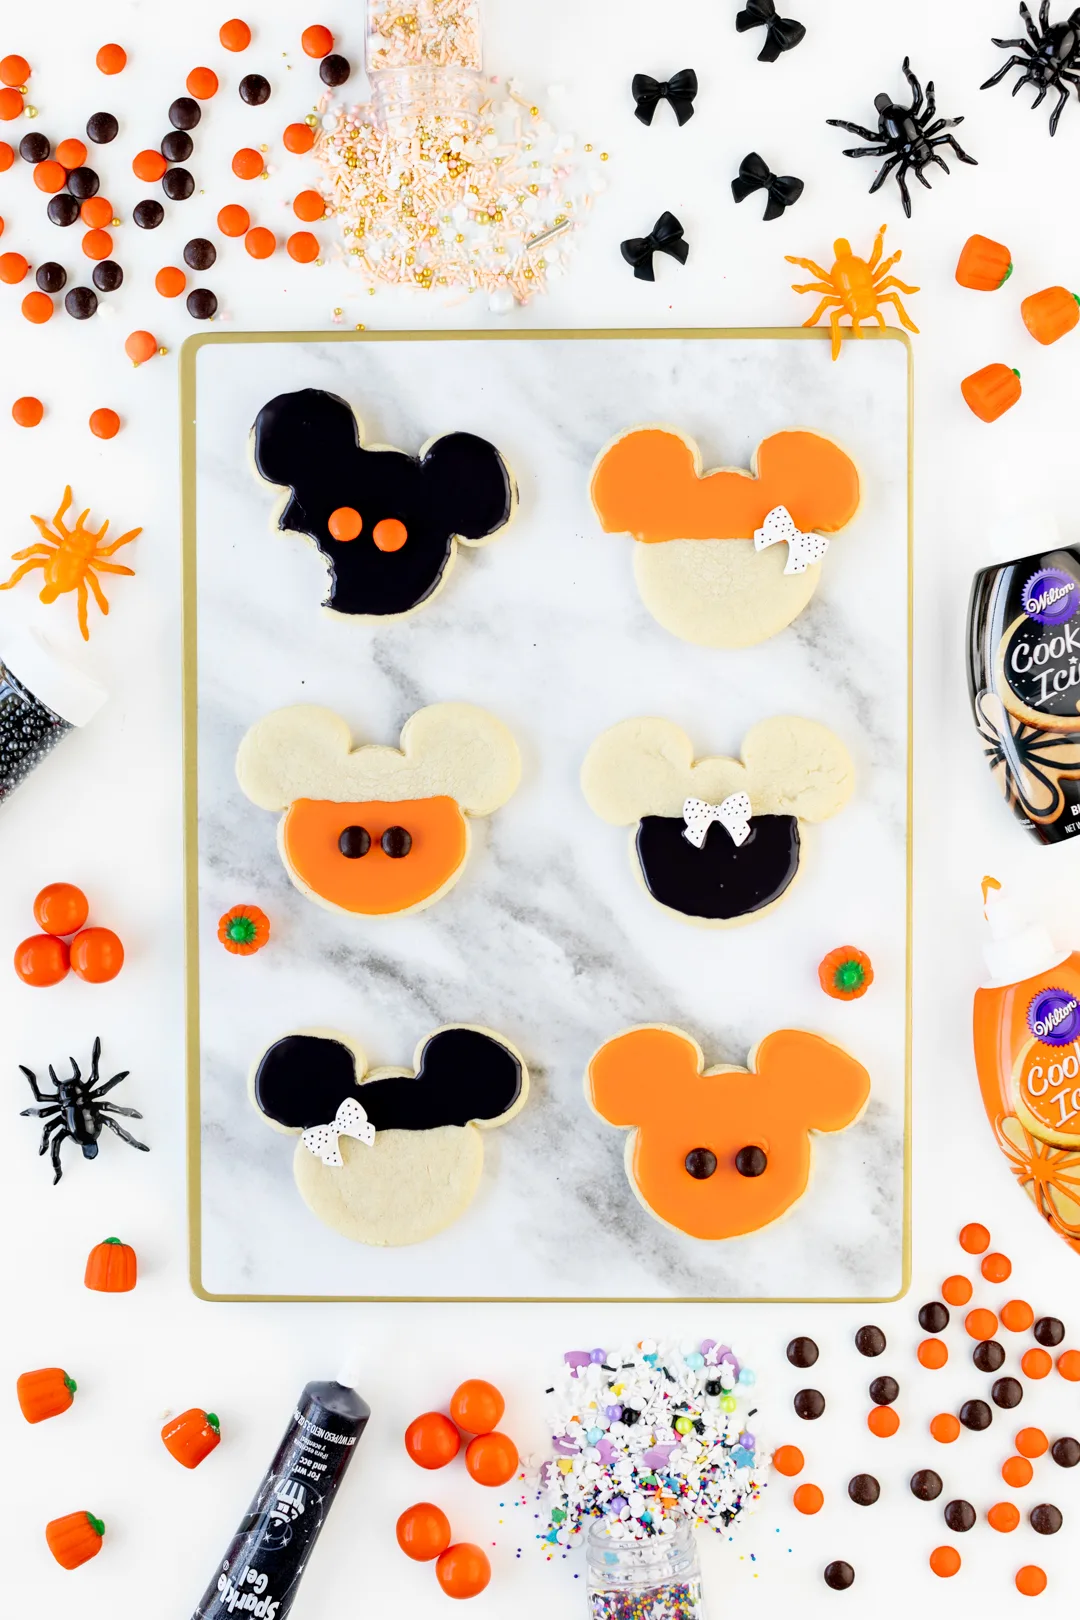 Mickey and Minnie Halloween Cookies decorated with orange and black icing and candies.